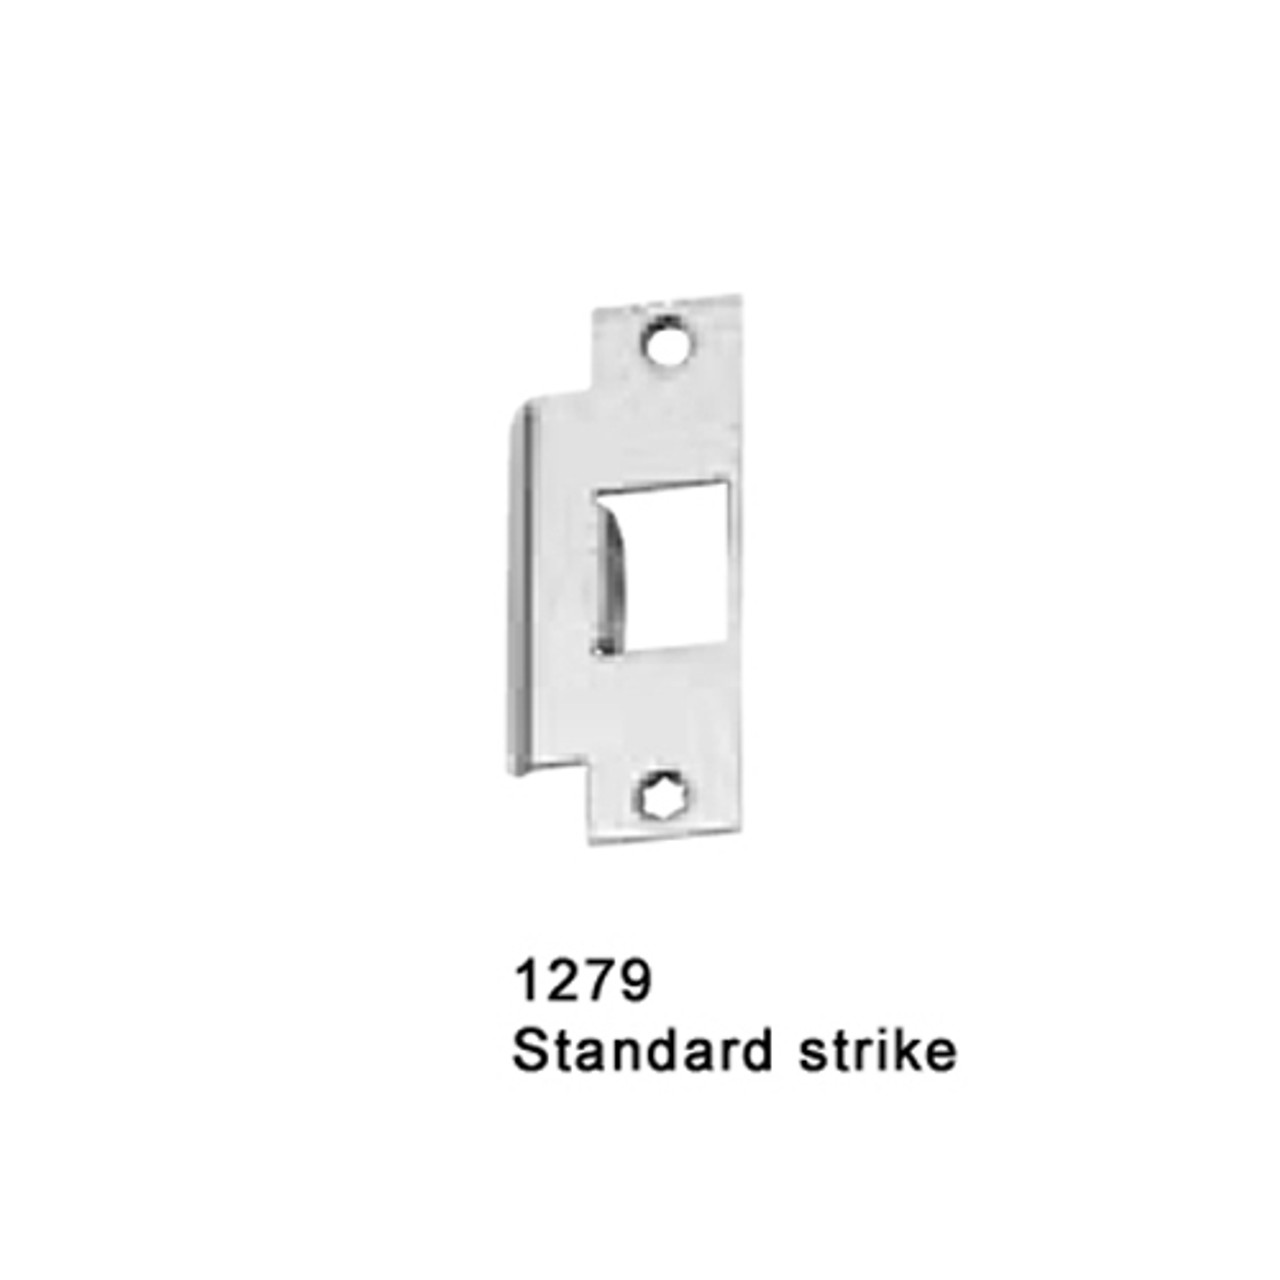 CD25-M-TP-US32D-3-LHR Falcon 25 Series Mortise Lock Devices with 512TP Thumbpiece Trim in Satin Stainless Steel